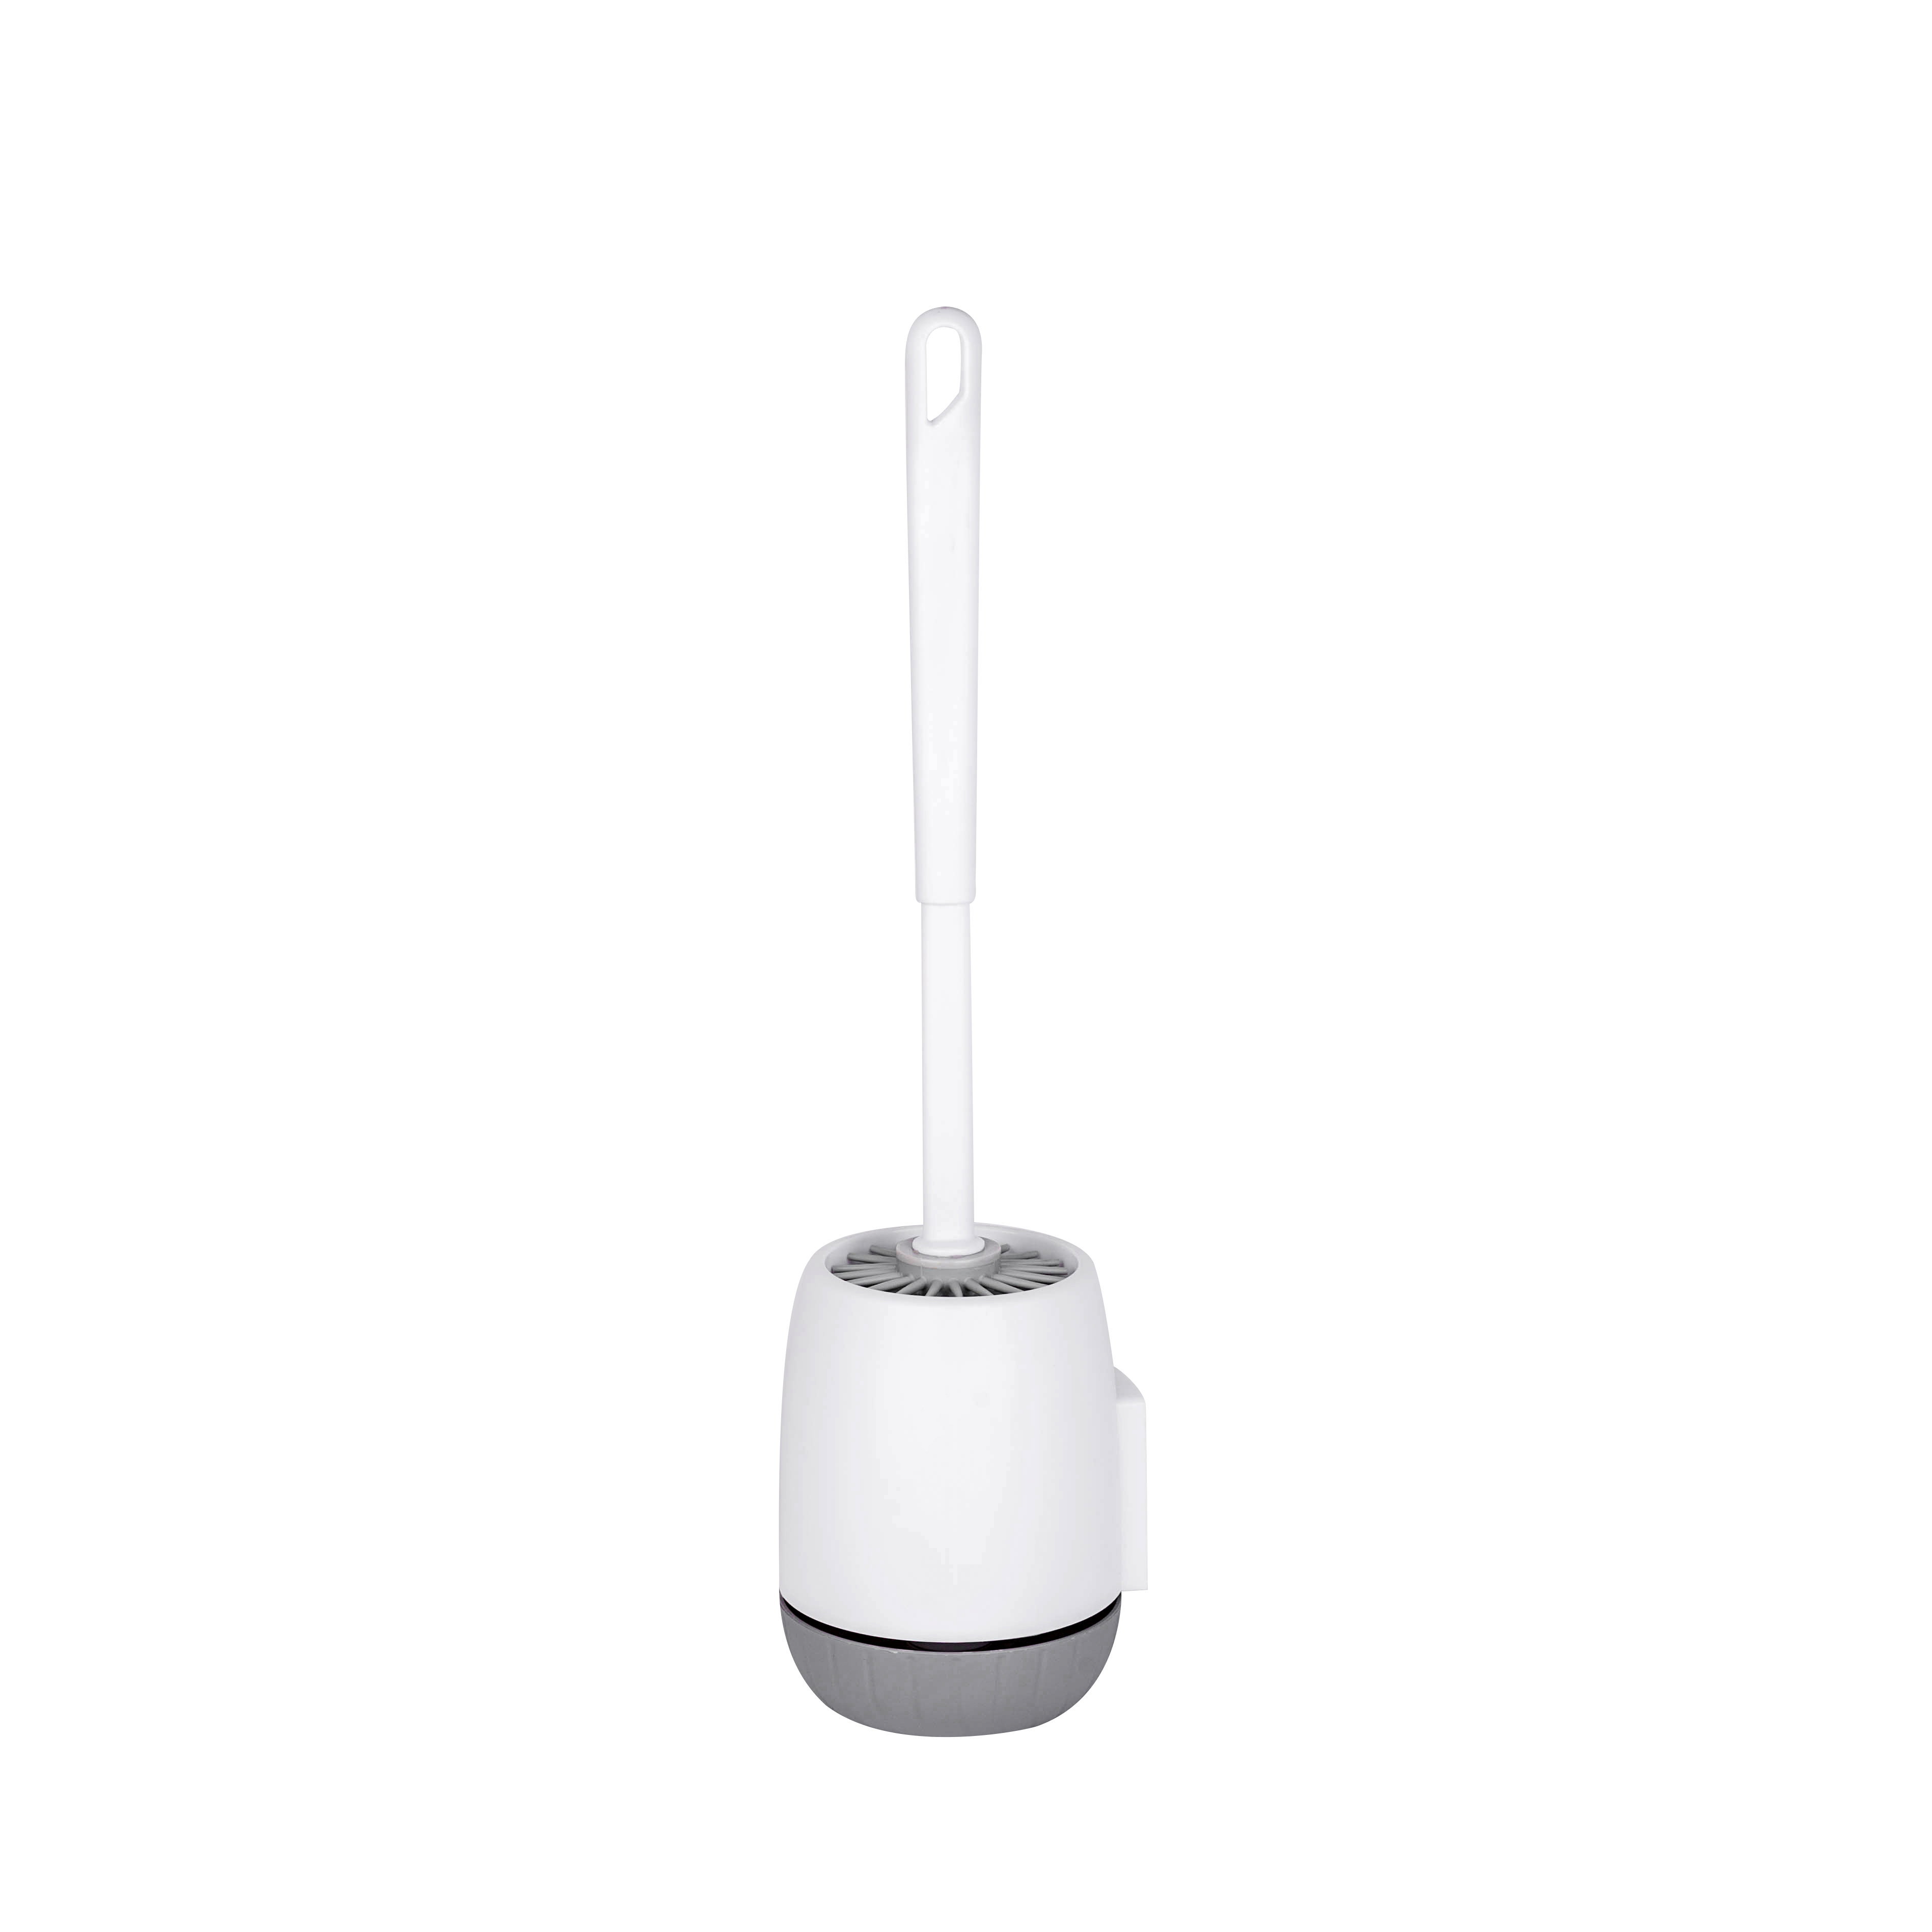 Hot selling fashionable round Long handle household Bathroom plastic Cleaning soft TPR silicon Toilet brush With holder flat set M1001